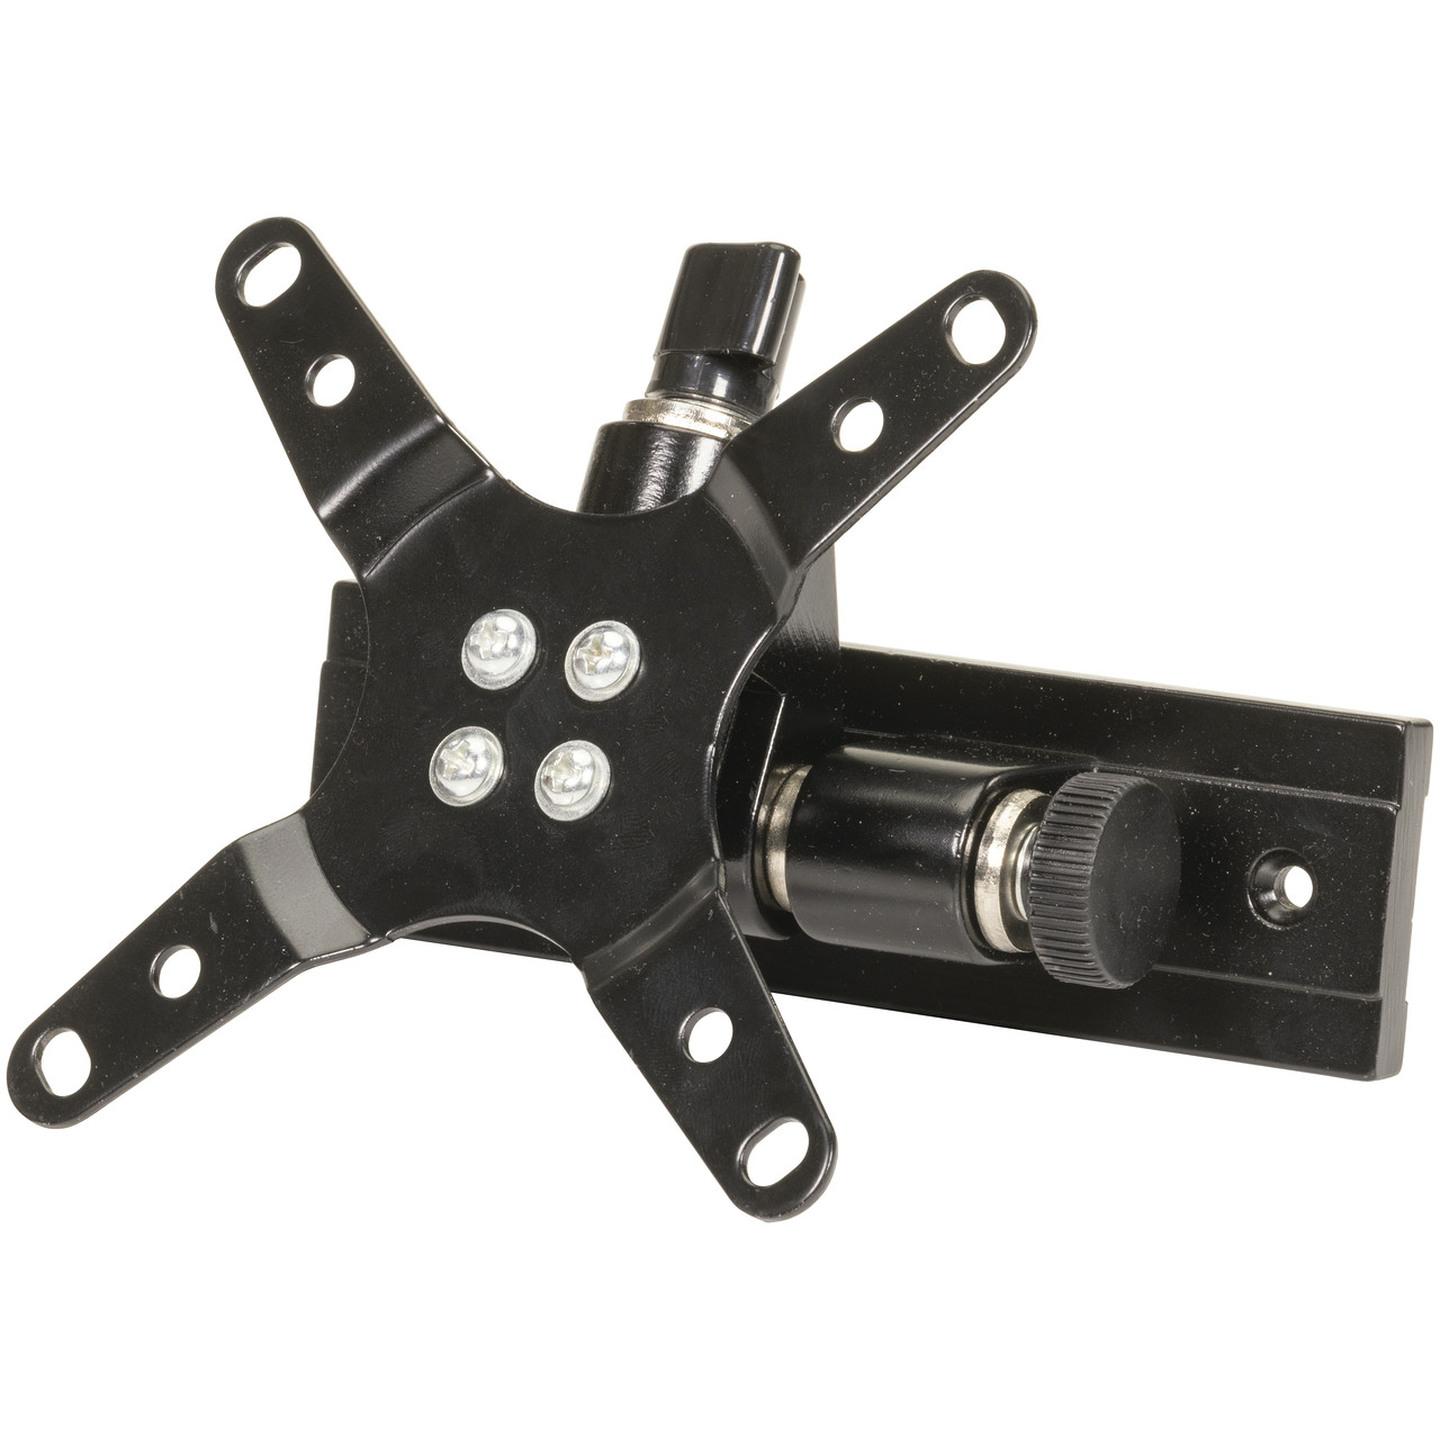 LCD Monitor Wall Mount Bracket with Swivel and Tilt